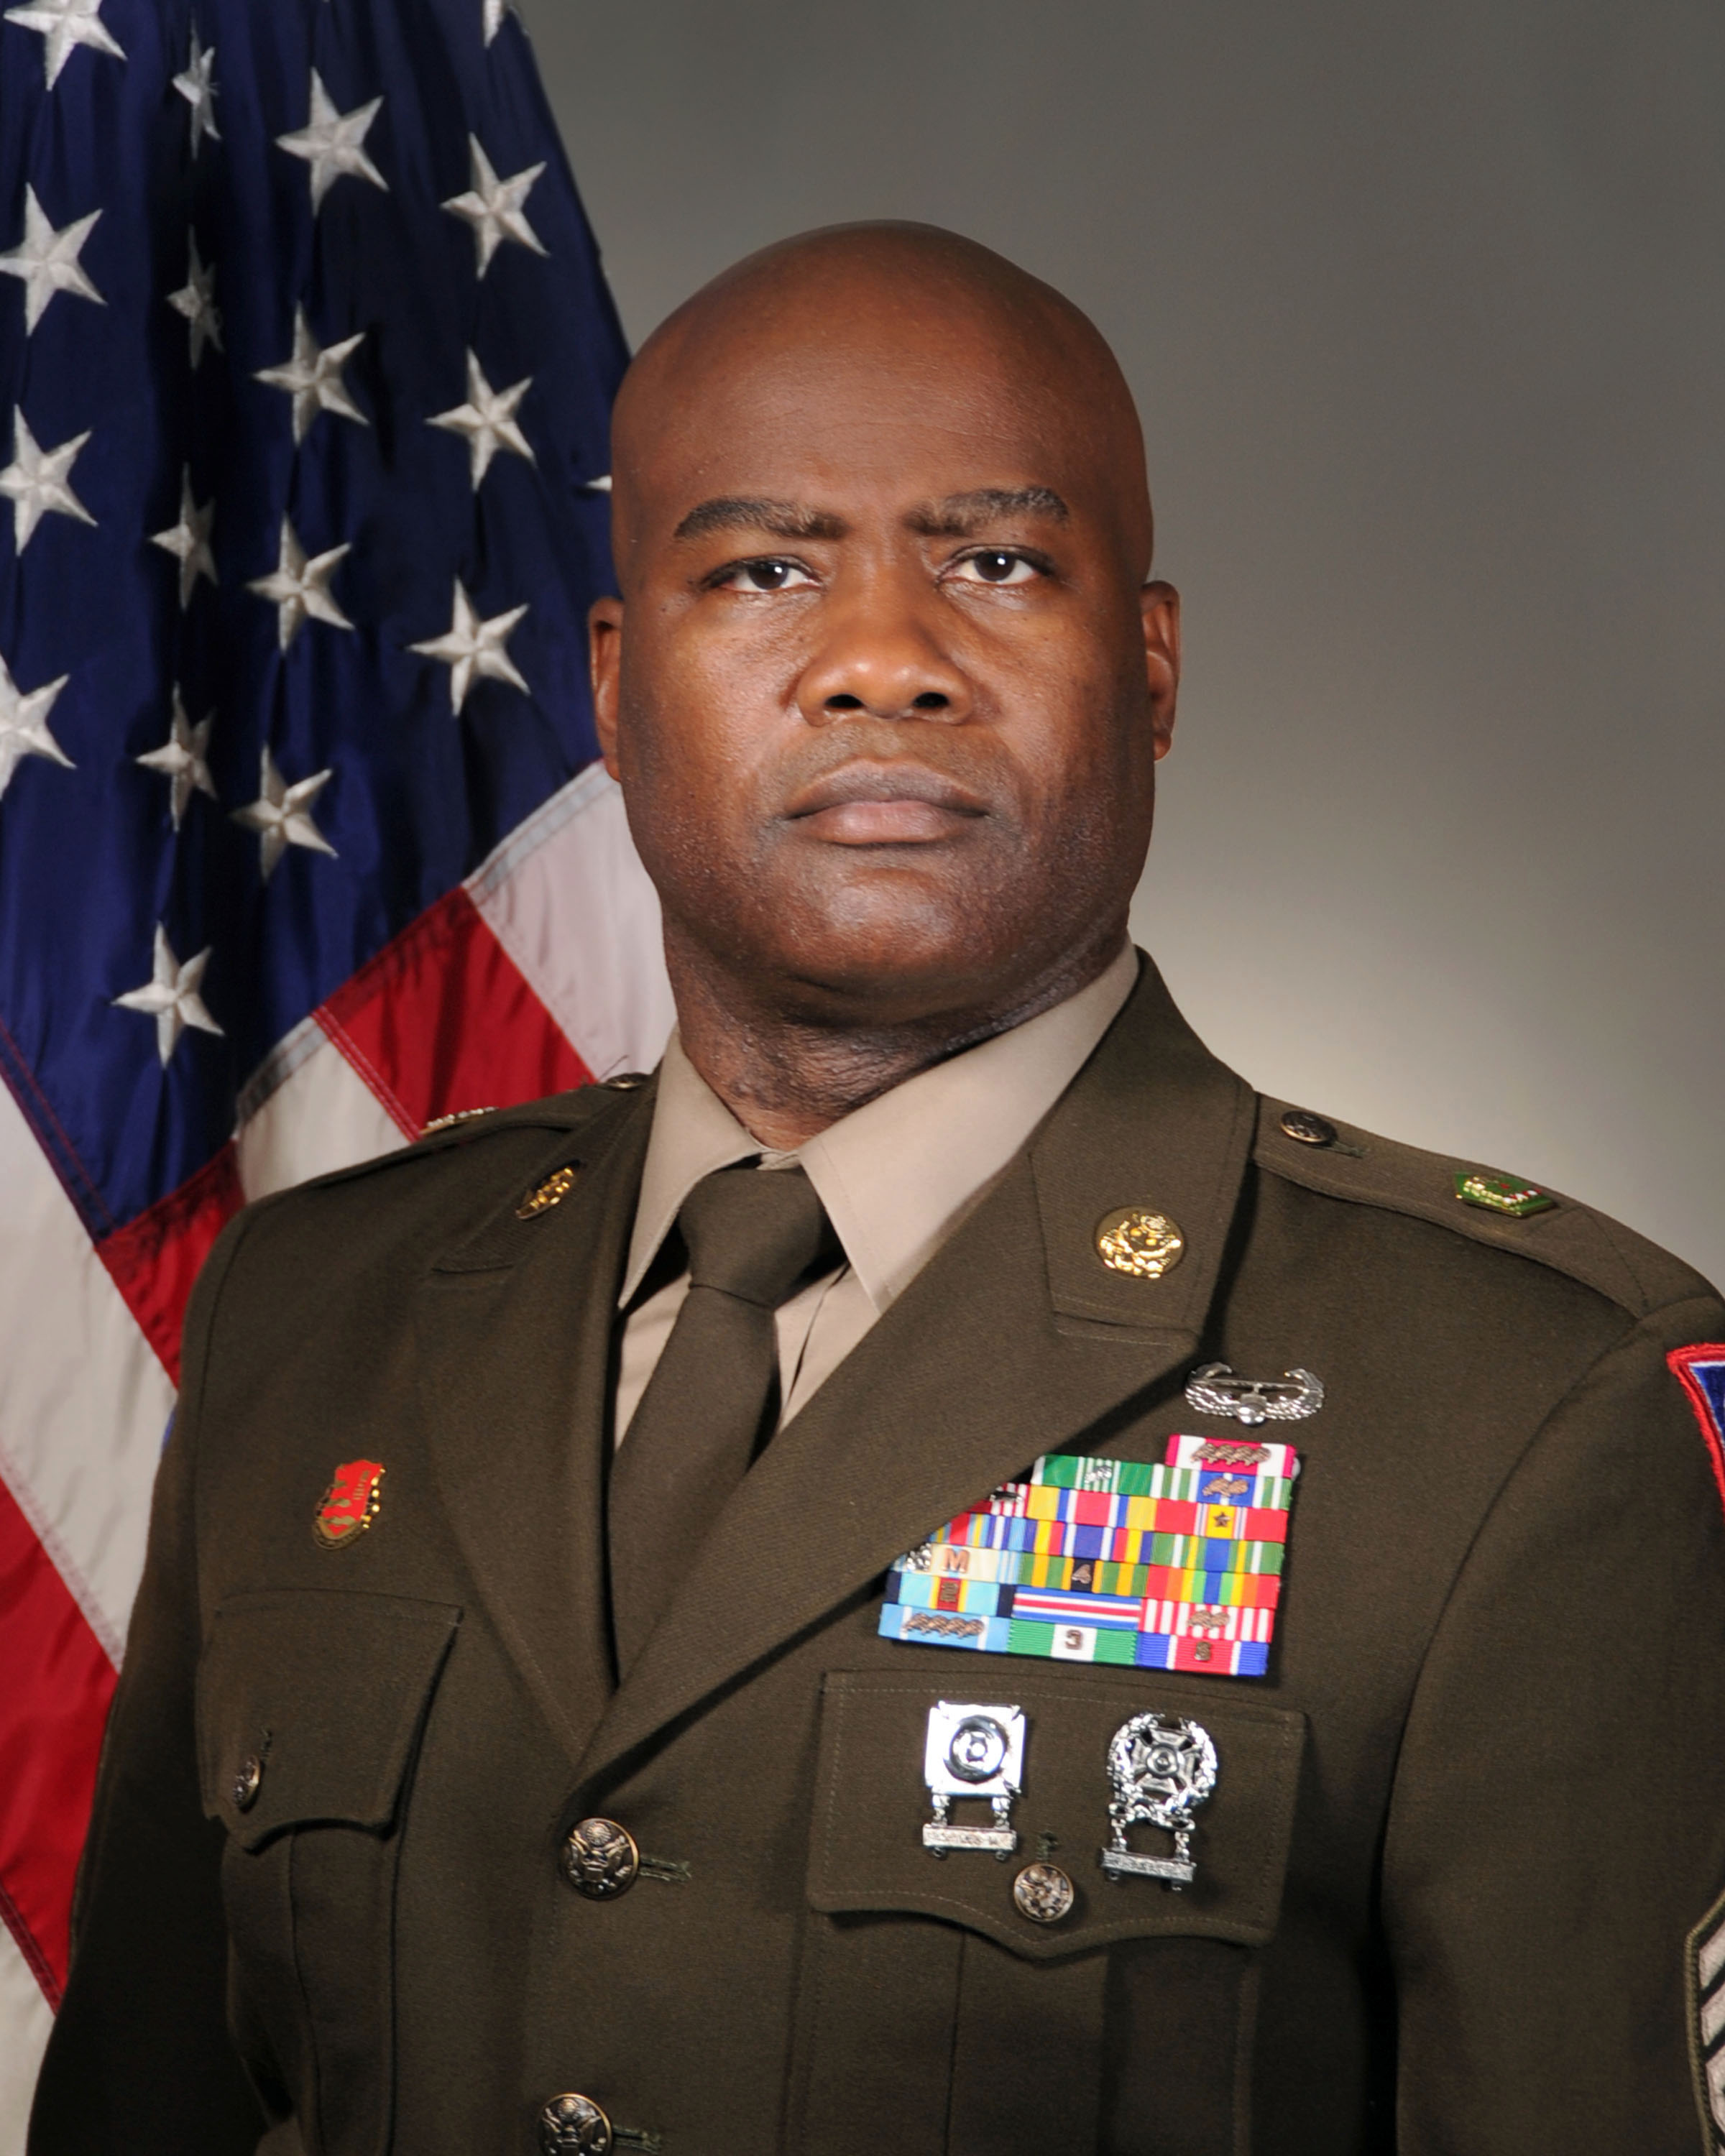 Official photograph for Ohio Army National Guard State Command Sergeant Major
